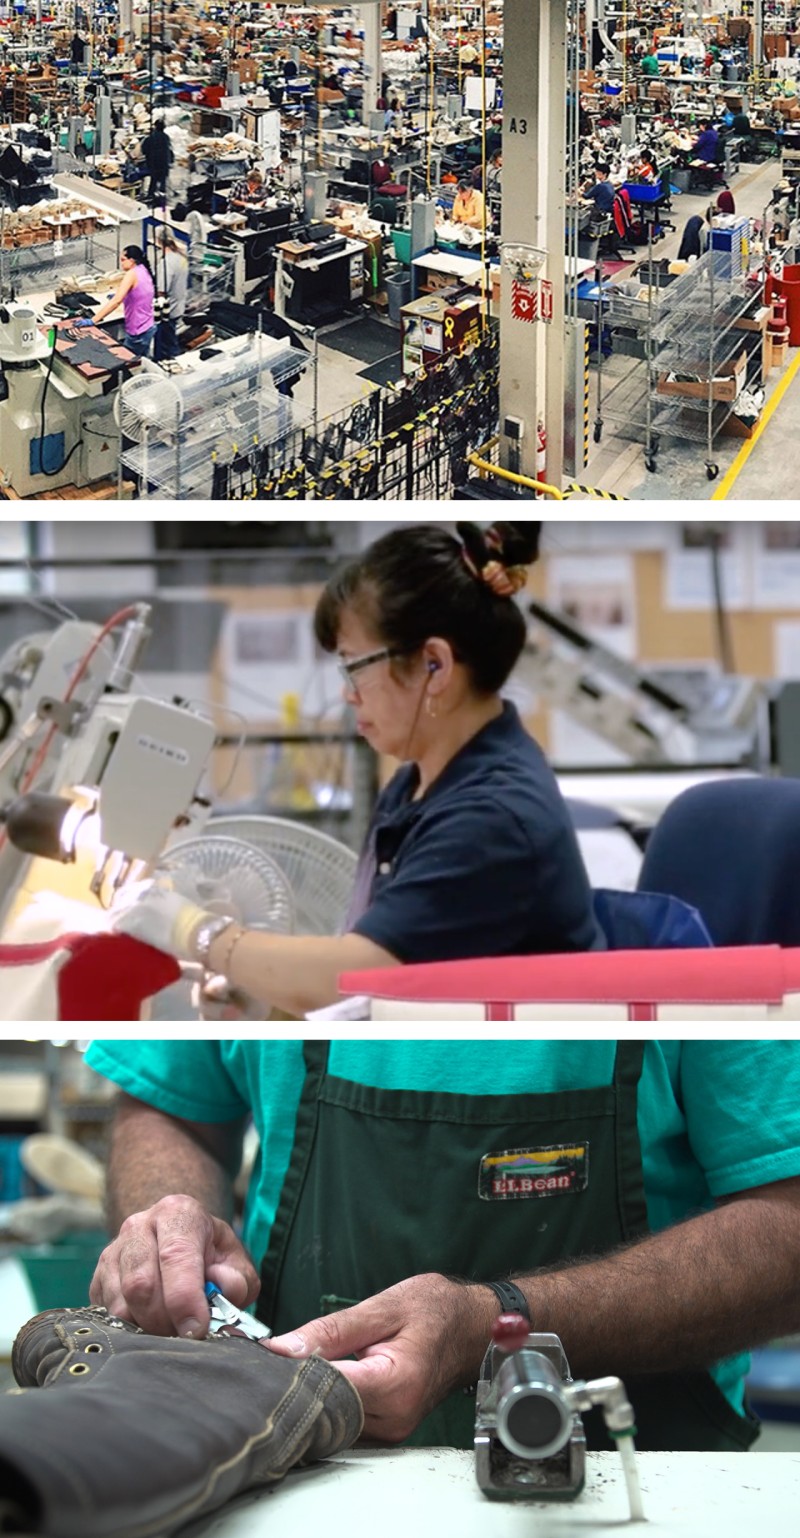 Collage of images of workers in factories.